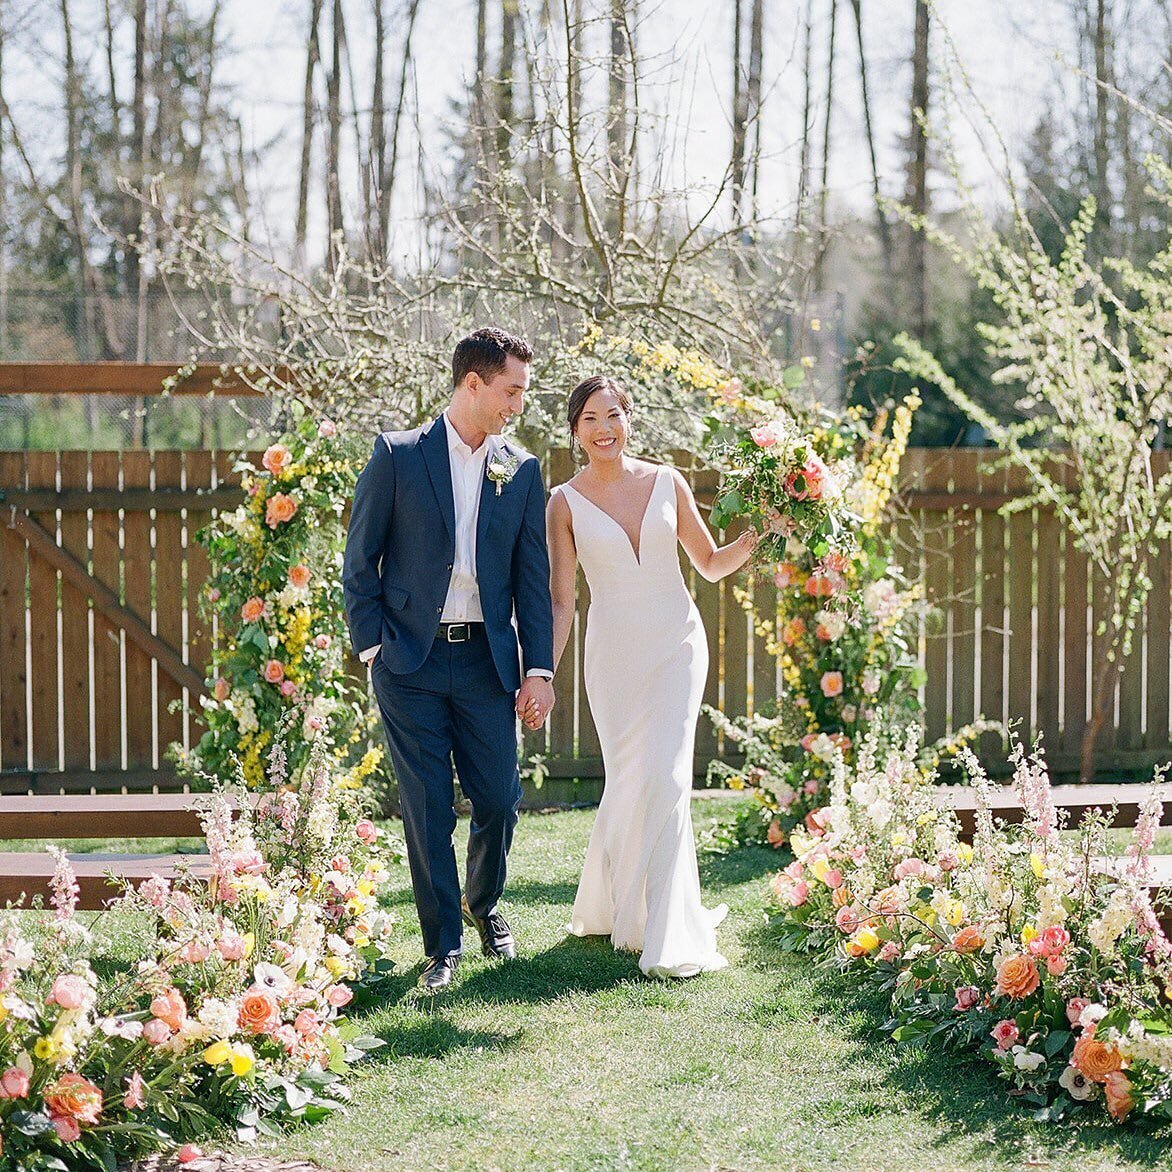 👉🏽 Swipe to see the sketch that paved the way (or should we say aisle??) for this incredible floral walkway.

Brought to life by the incredible @fromthegroundupfloral 🌸🌿🌾

-
Design | @pacific_engagements
Photography | @sarahharrisphoto
Floral | 